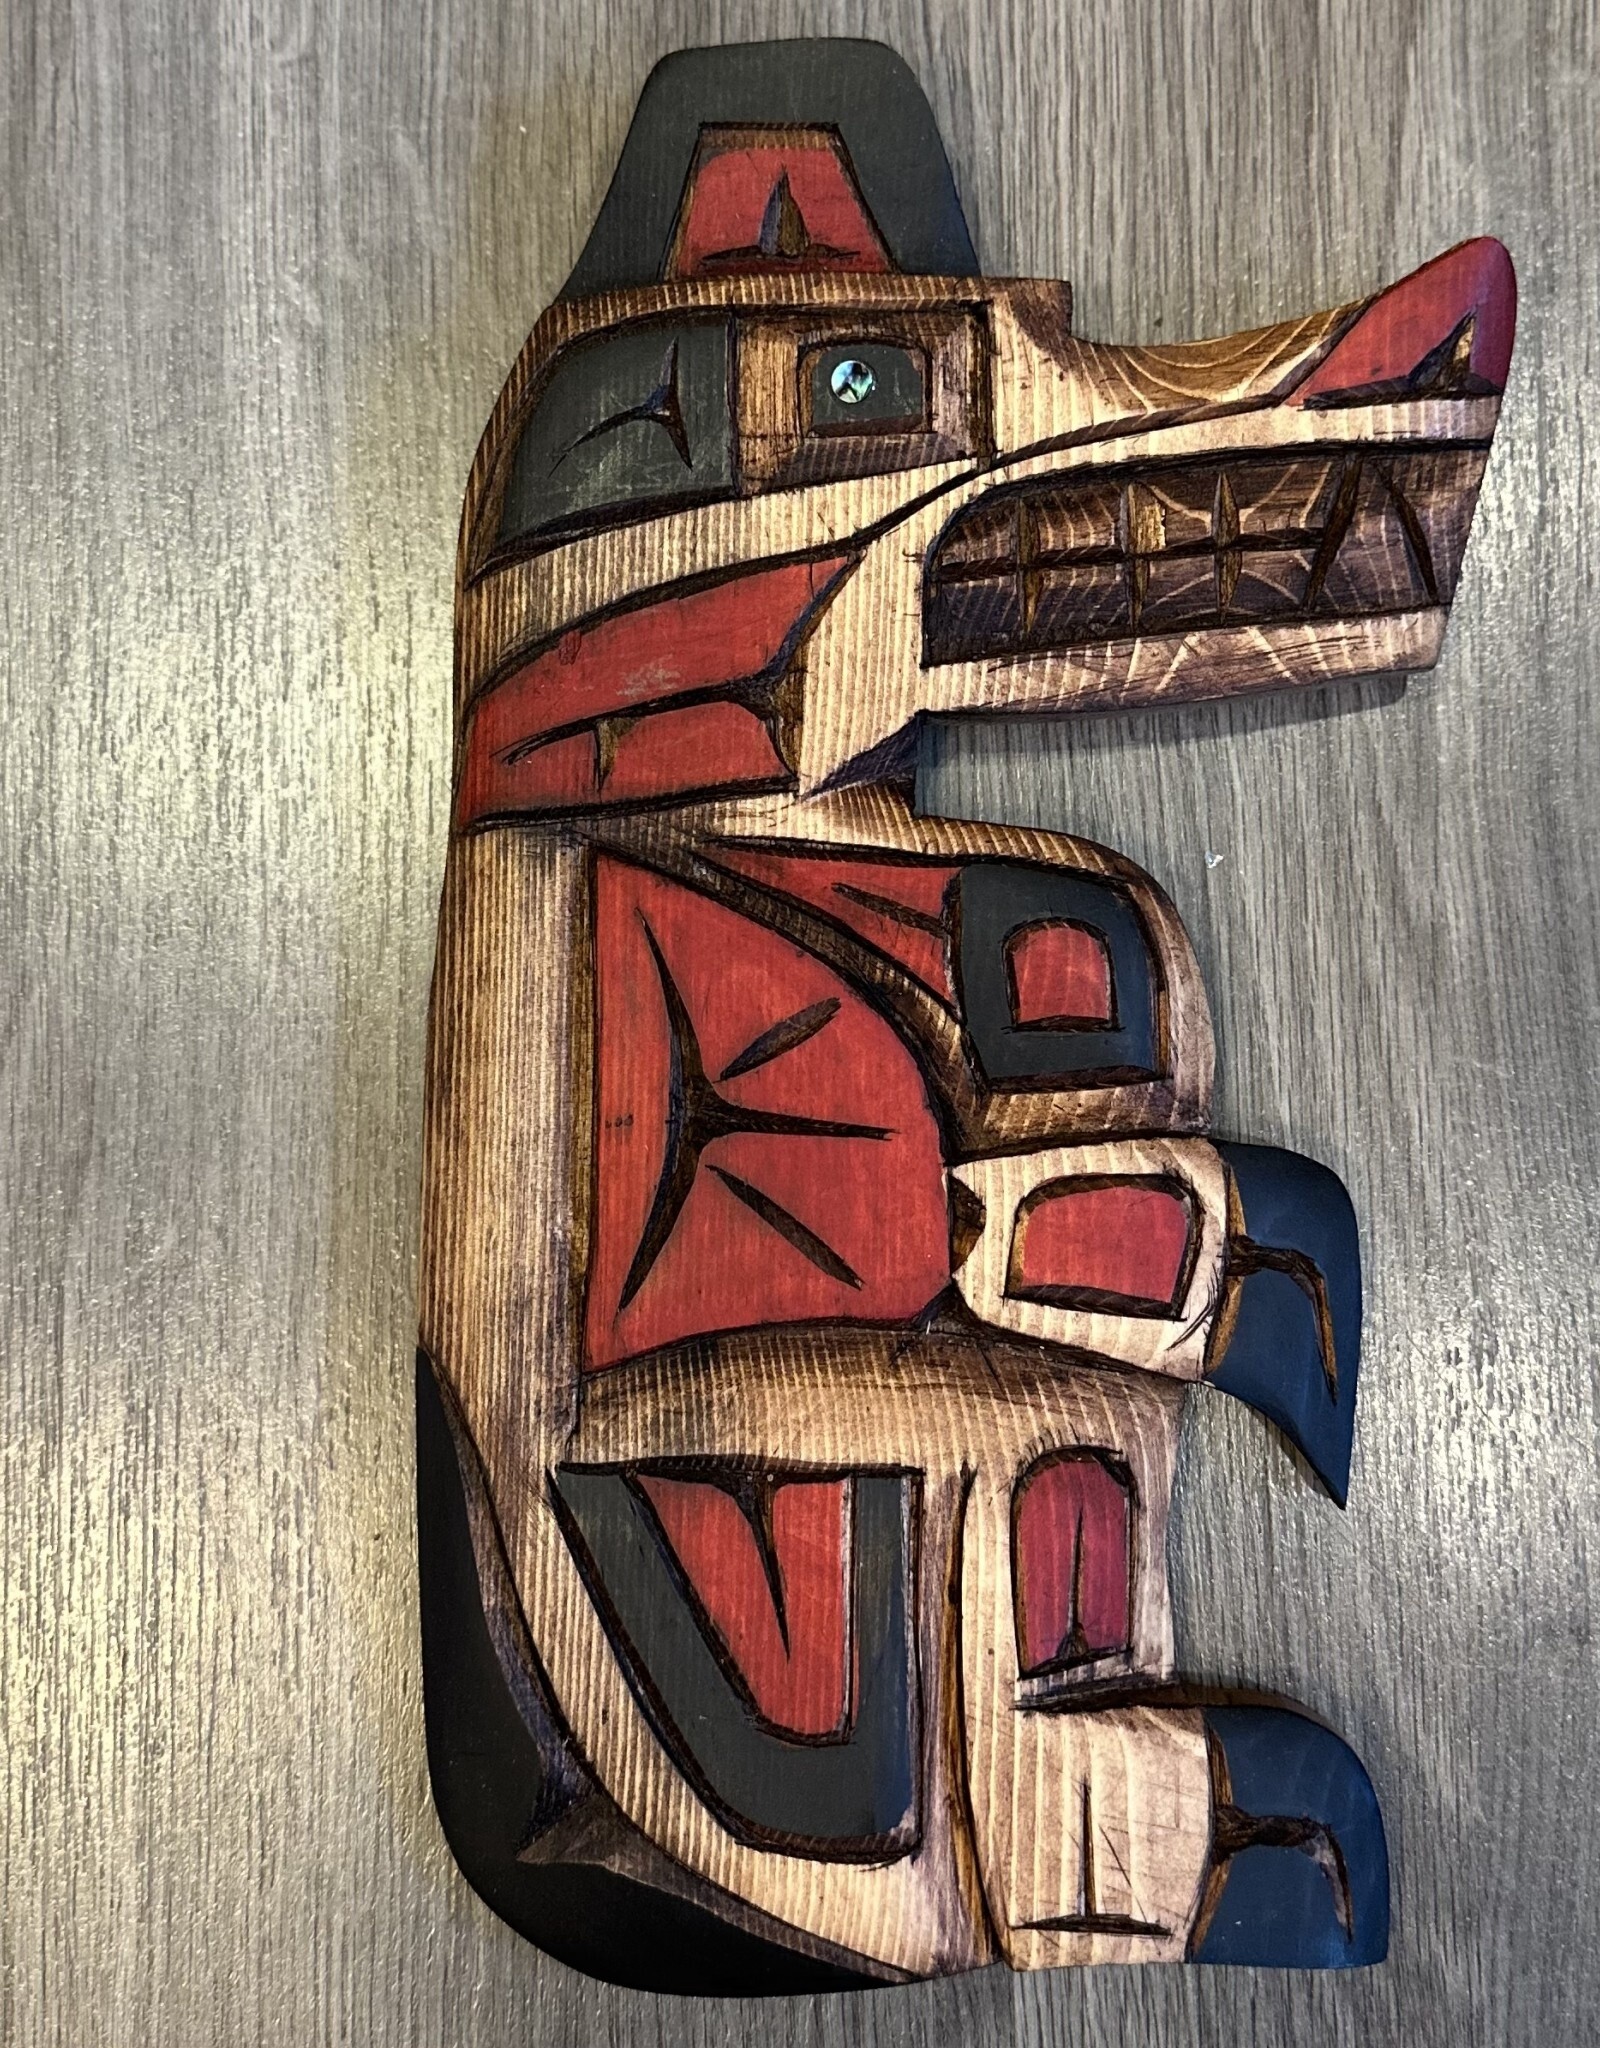 Aboriginal - Bear Carving With Abalone Eye - Carver: Connie Edwards